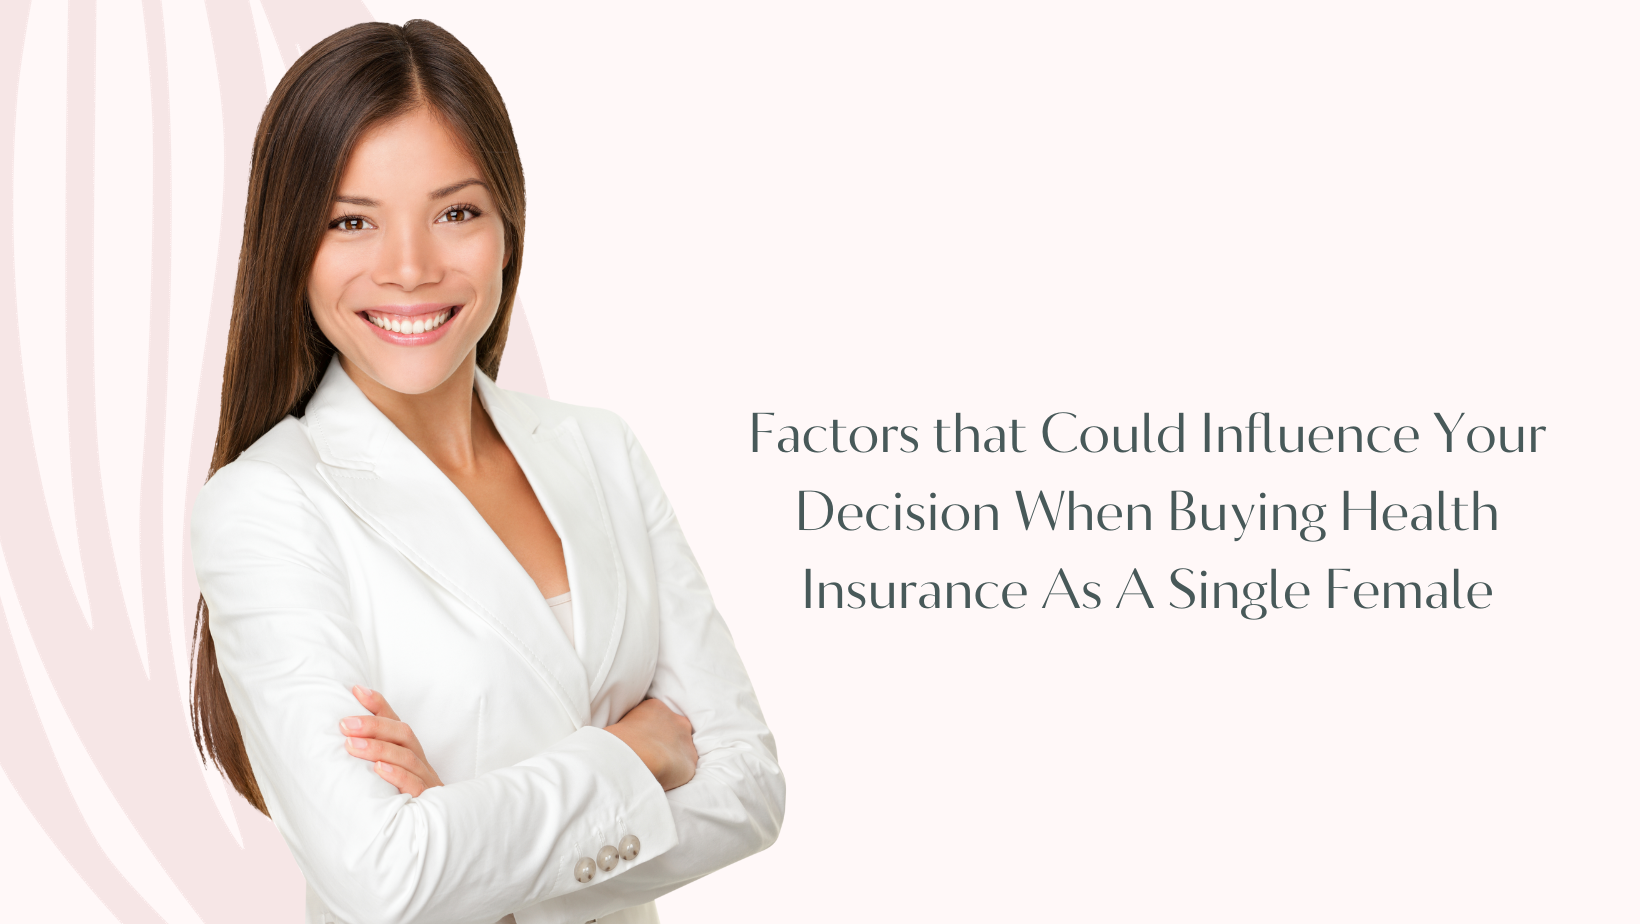 Factors that Could Influence Your Decision When Buying Health Insurance As A Single Female